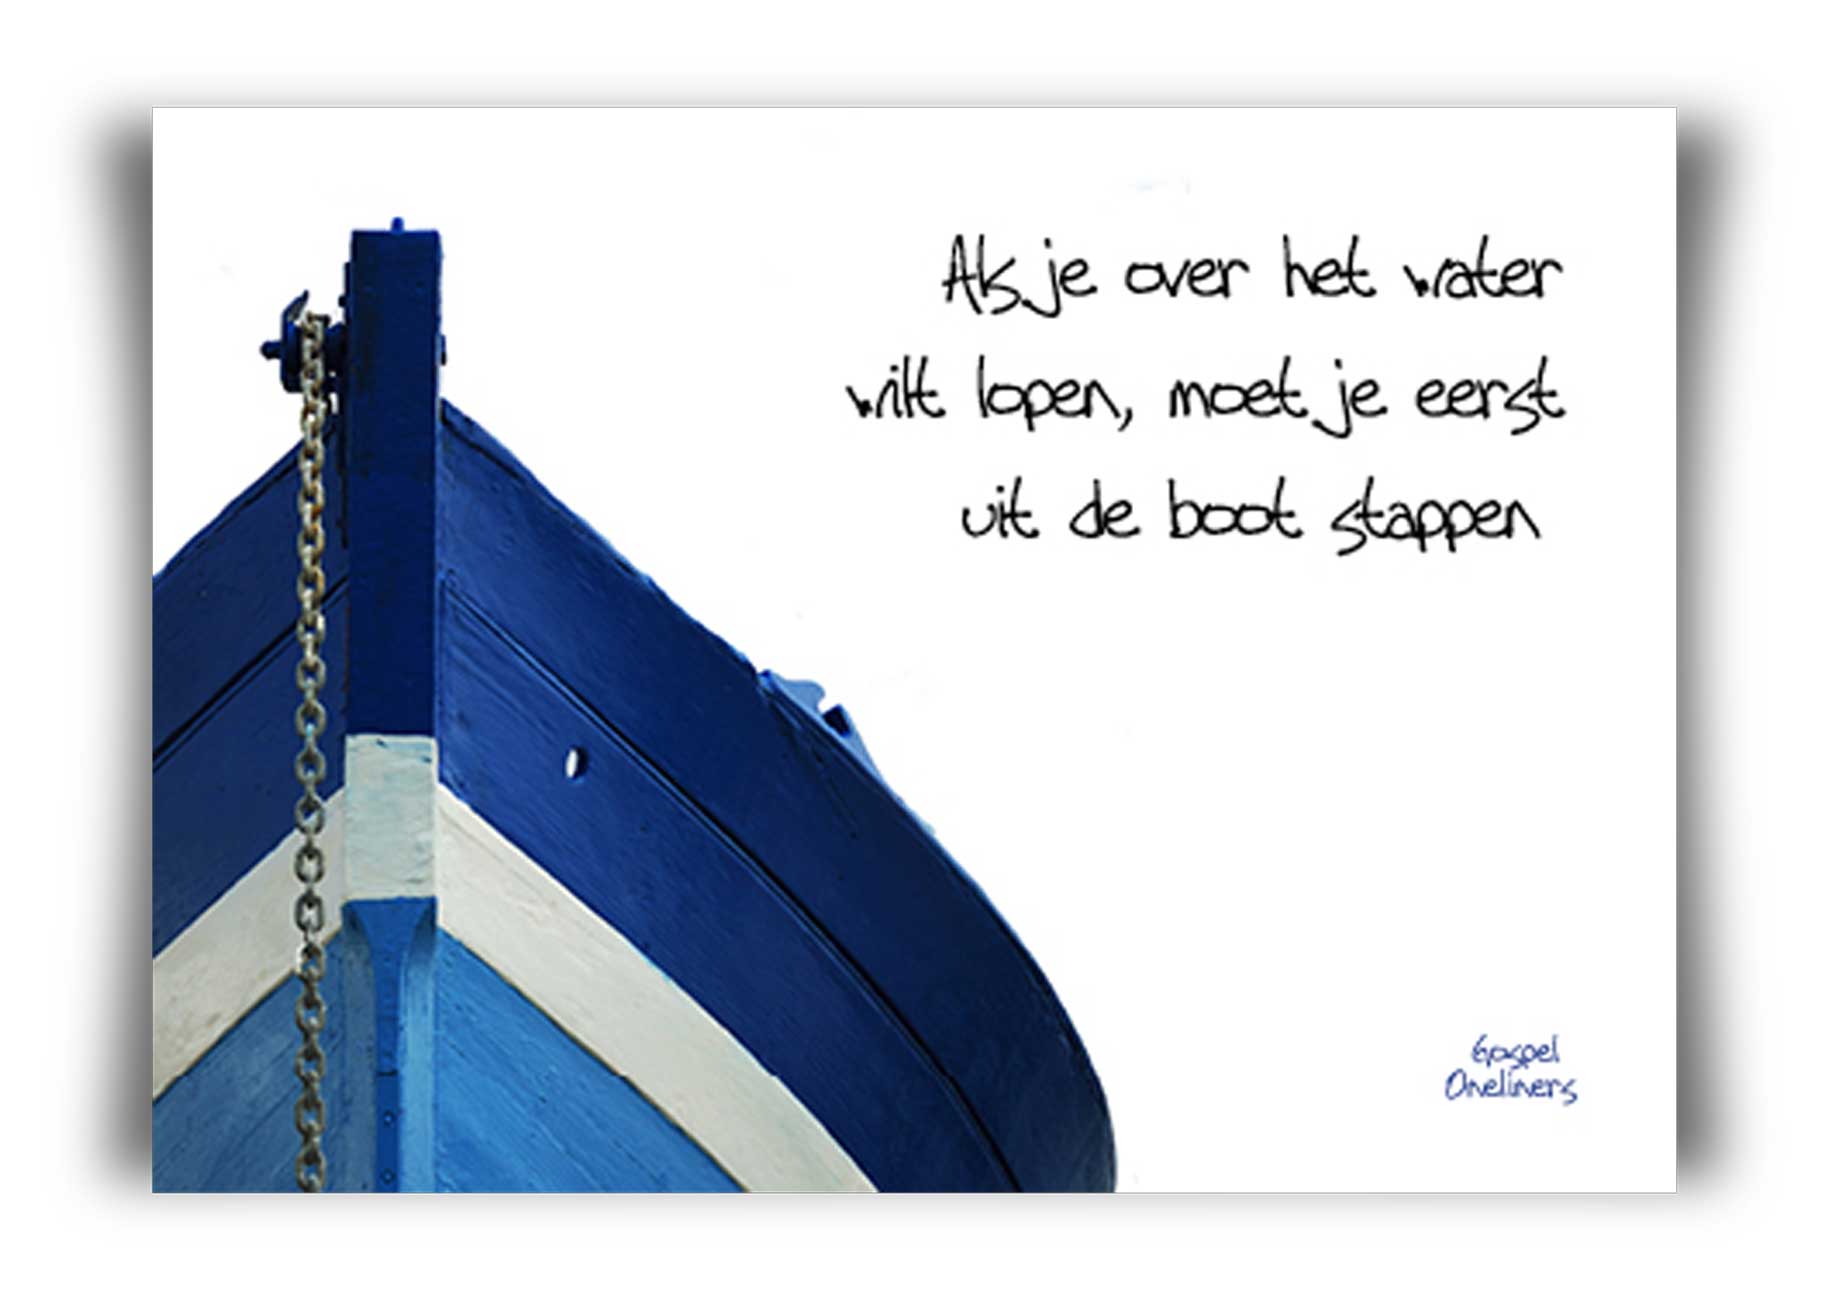 'Als je over water wilt lopen' - MA10049 -  Quotes